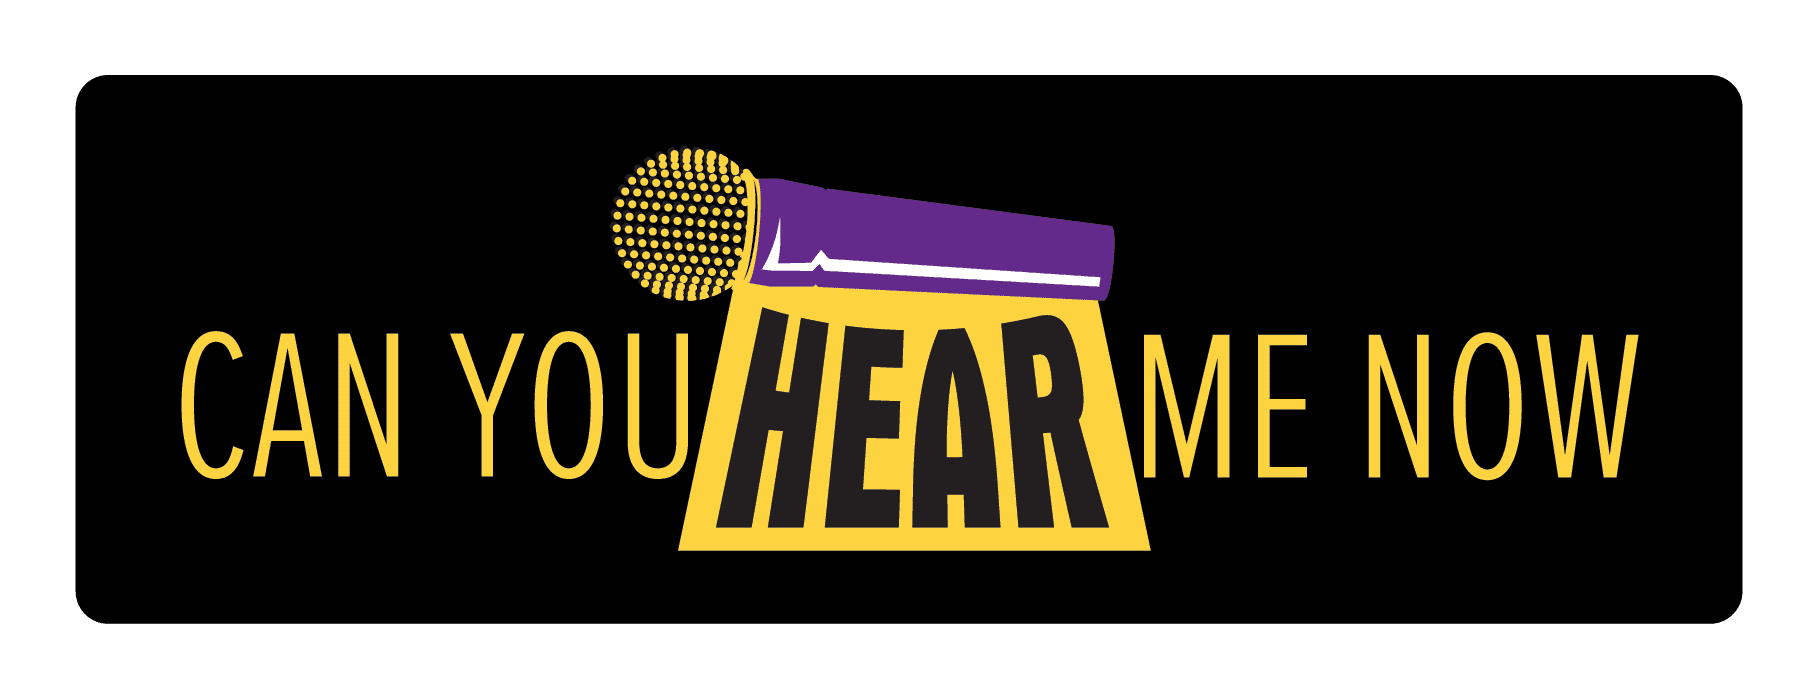 Can You Hear Me Now | school speakers logo